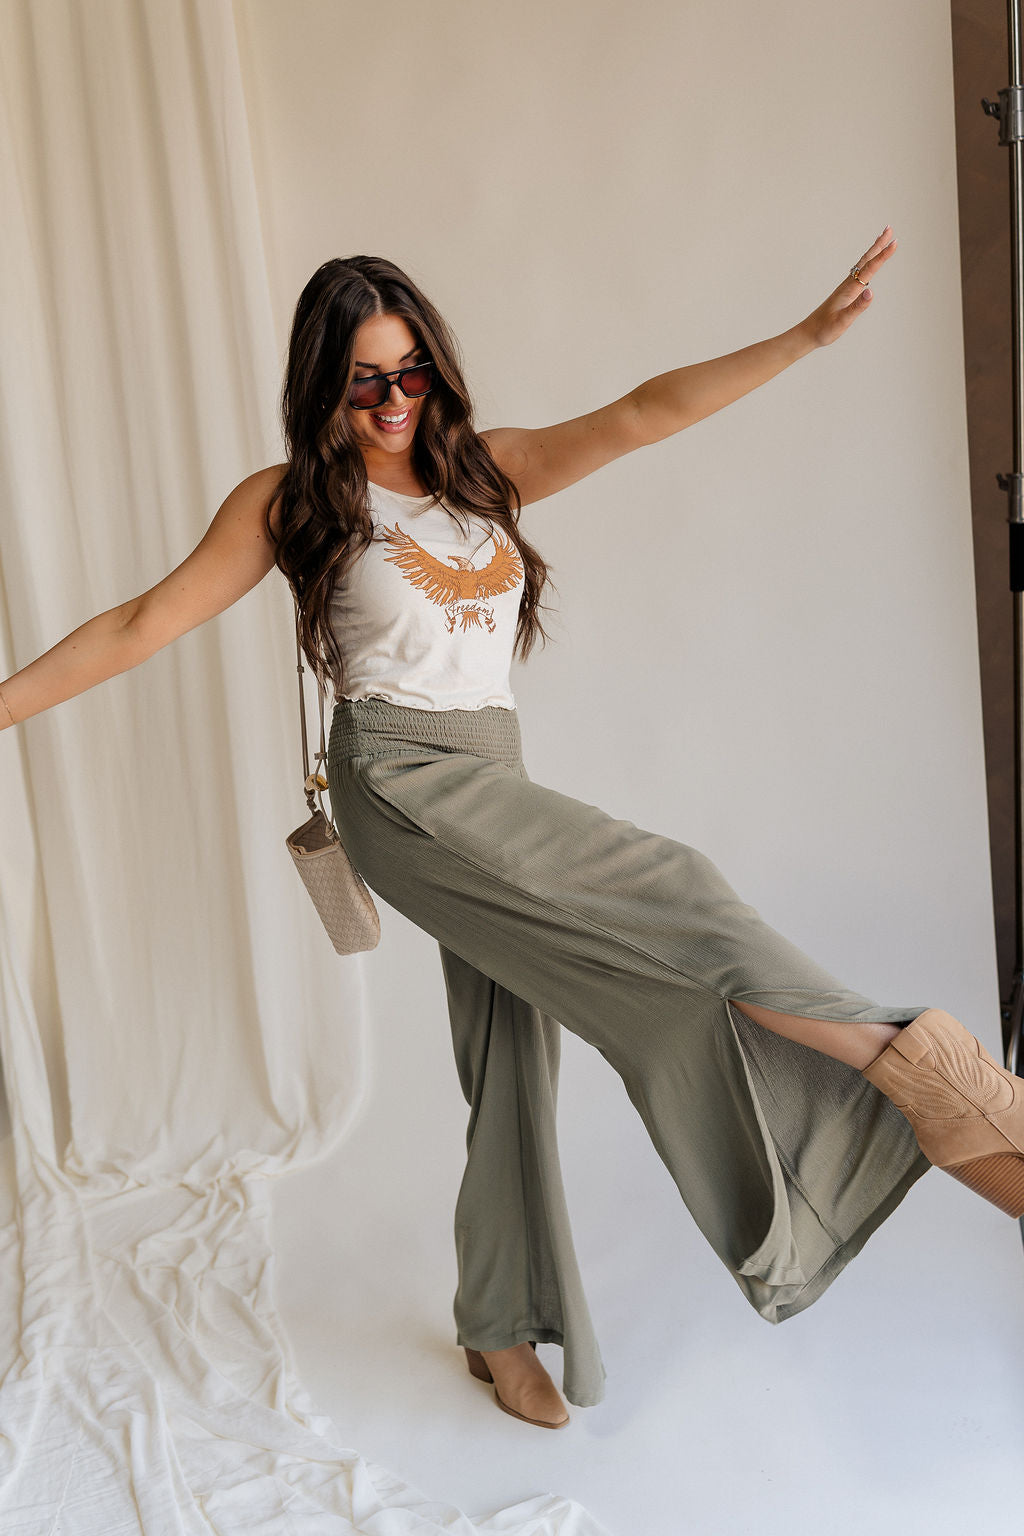 side view of female model wearing the Audrey Olive Green Wide Leg Pants that have olive green fabric, a smocked waist, wide legs, and side slits. Worn with beige tank top. Model is kicking out leg.